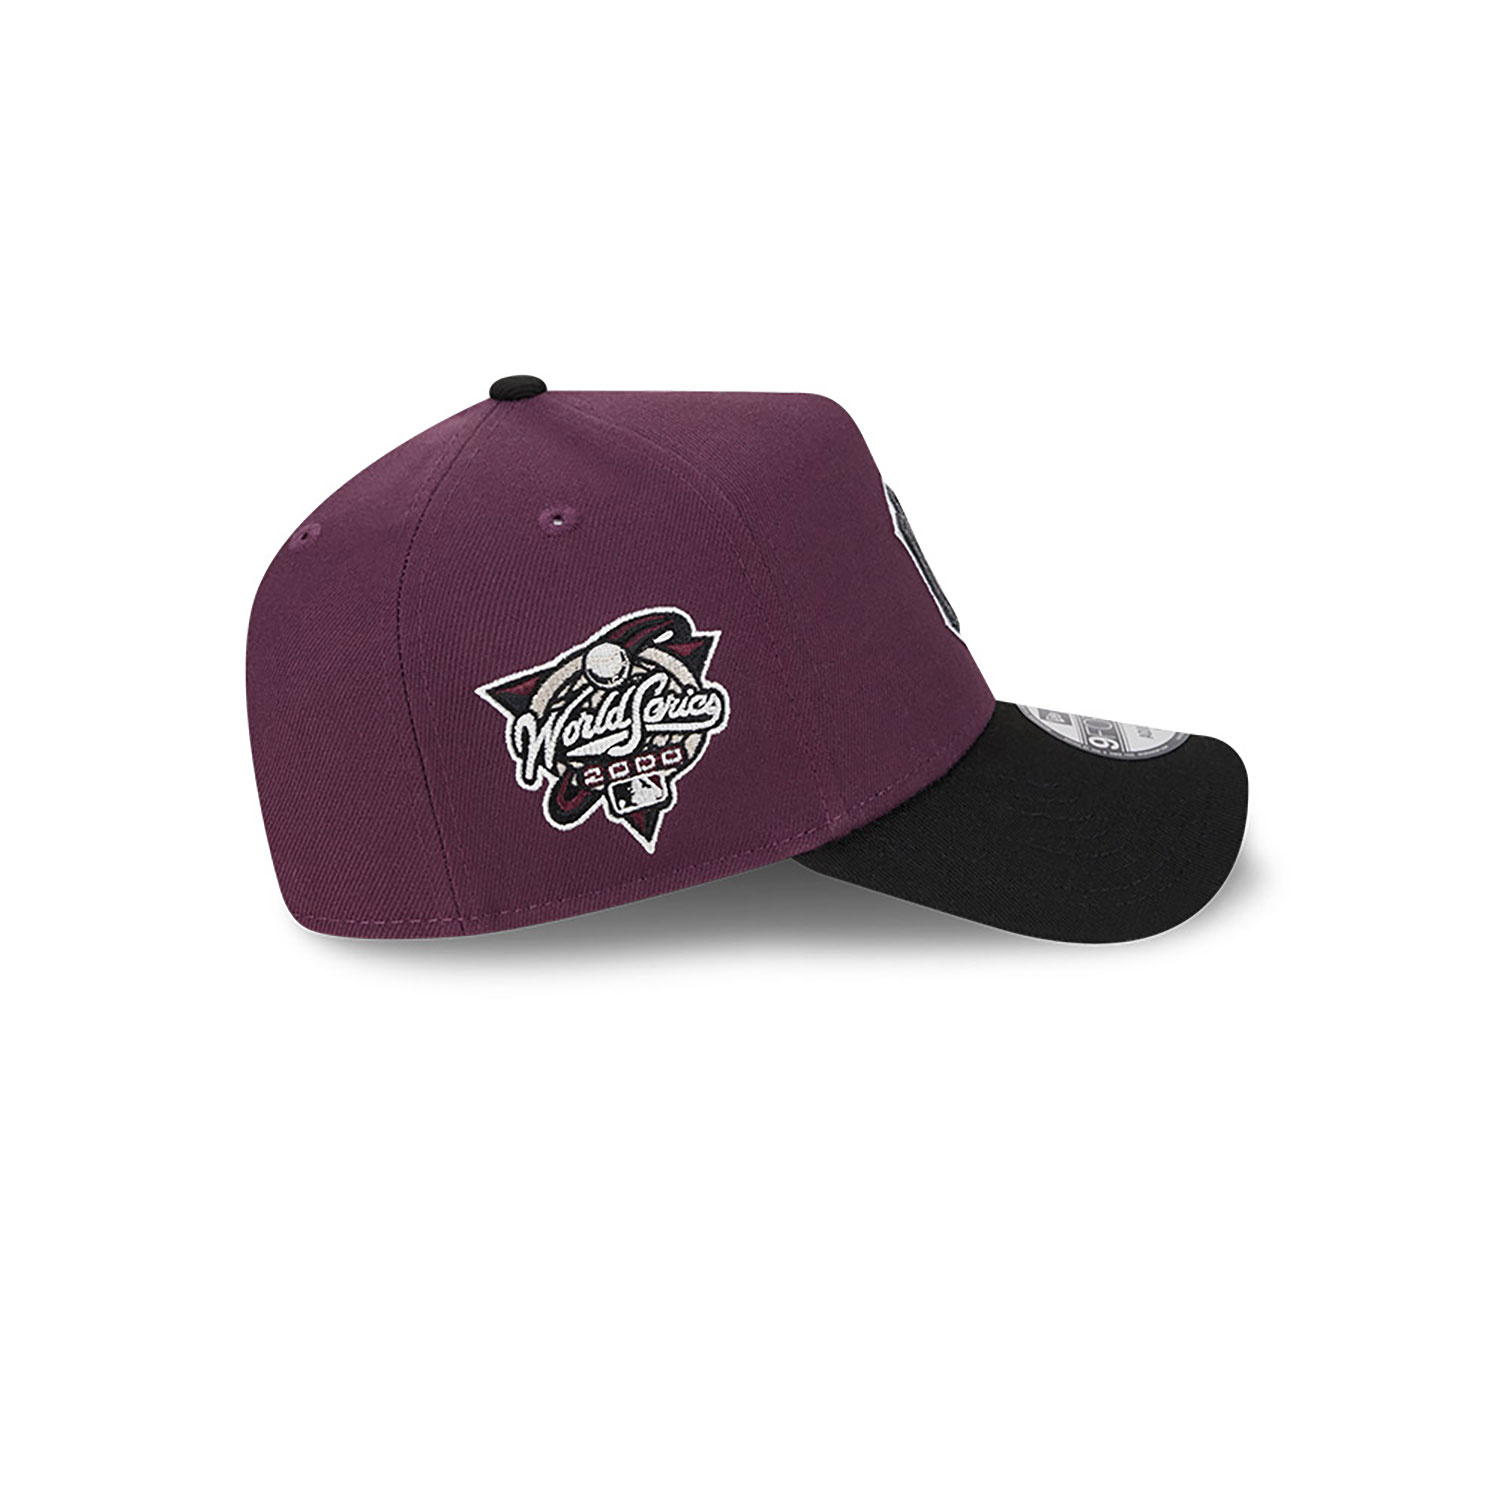 New York Yankees Two-Tone Dark Purple 9FORTY A-Frame Adjustable Cap